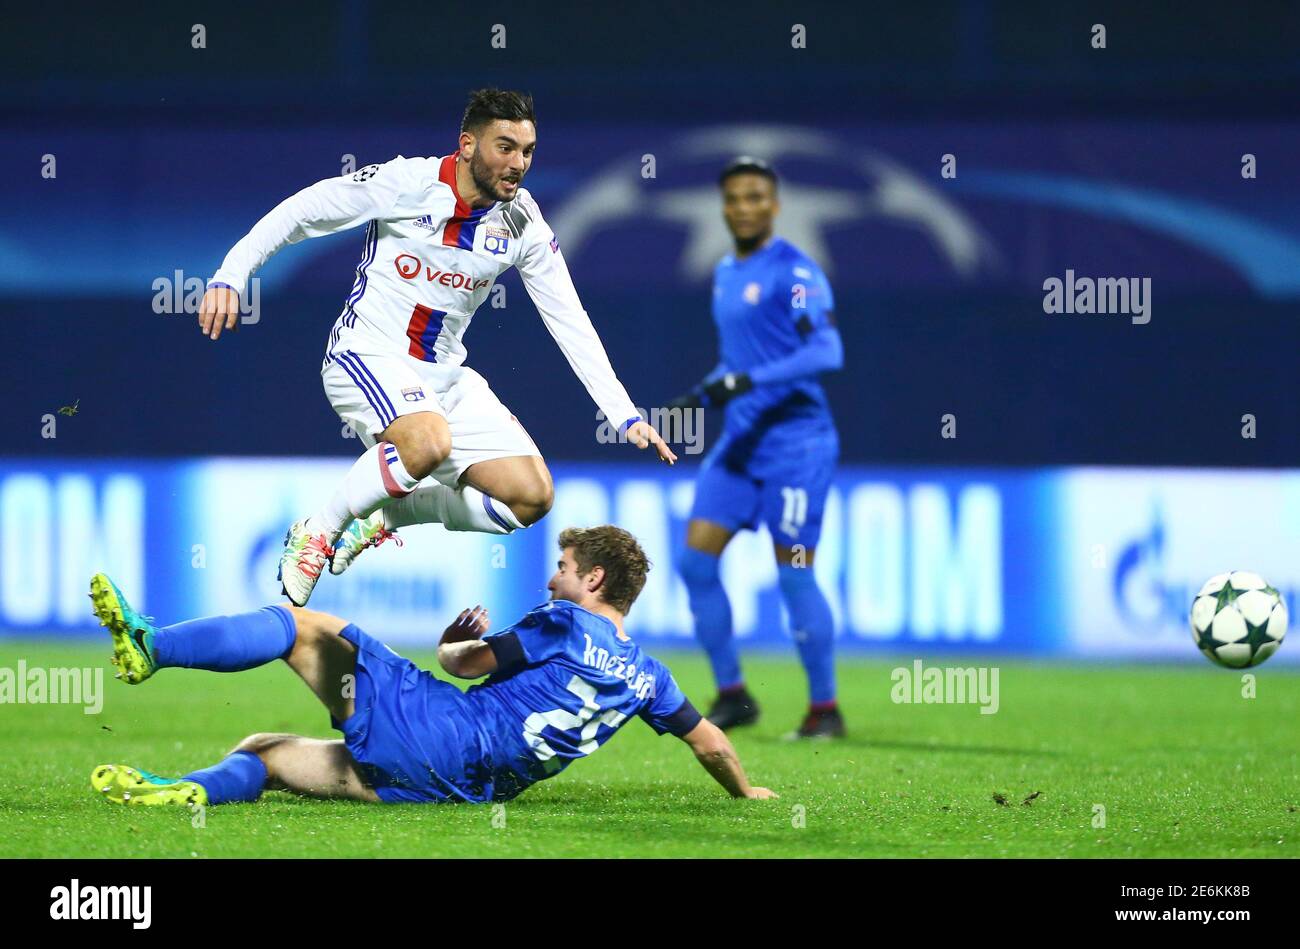 Football Soccer - Dinamo Zagreb V Olympique Lyon - UEFA Champions League  Group Stage - Group H - Maksimir stadium, Zagreb, Croatia - 22/10/16. Jordan  Ferri of Olympique Lyon in action with